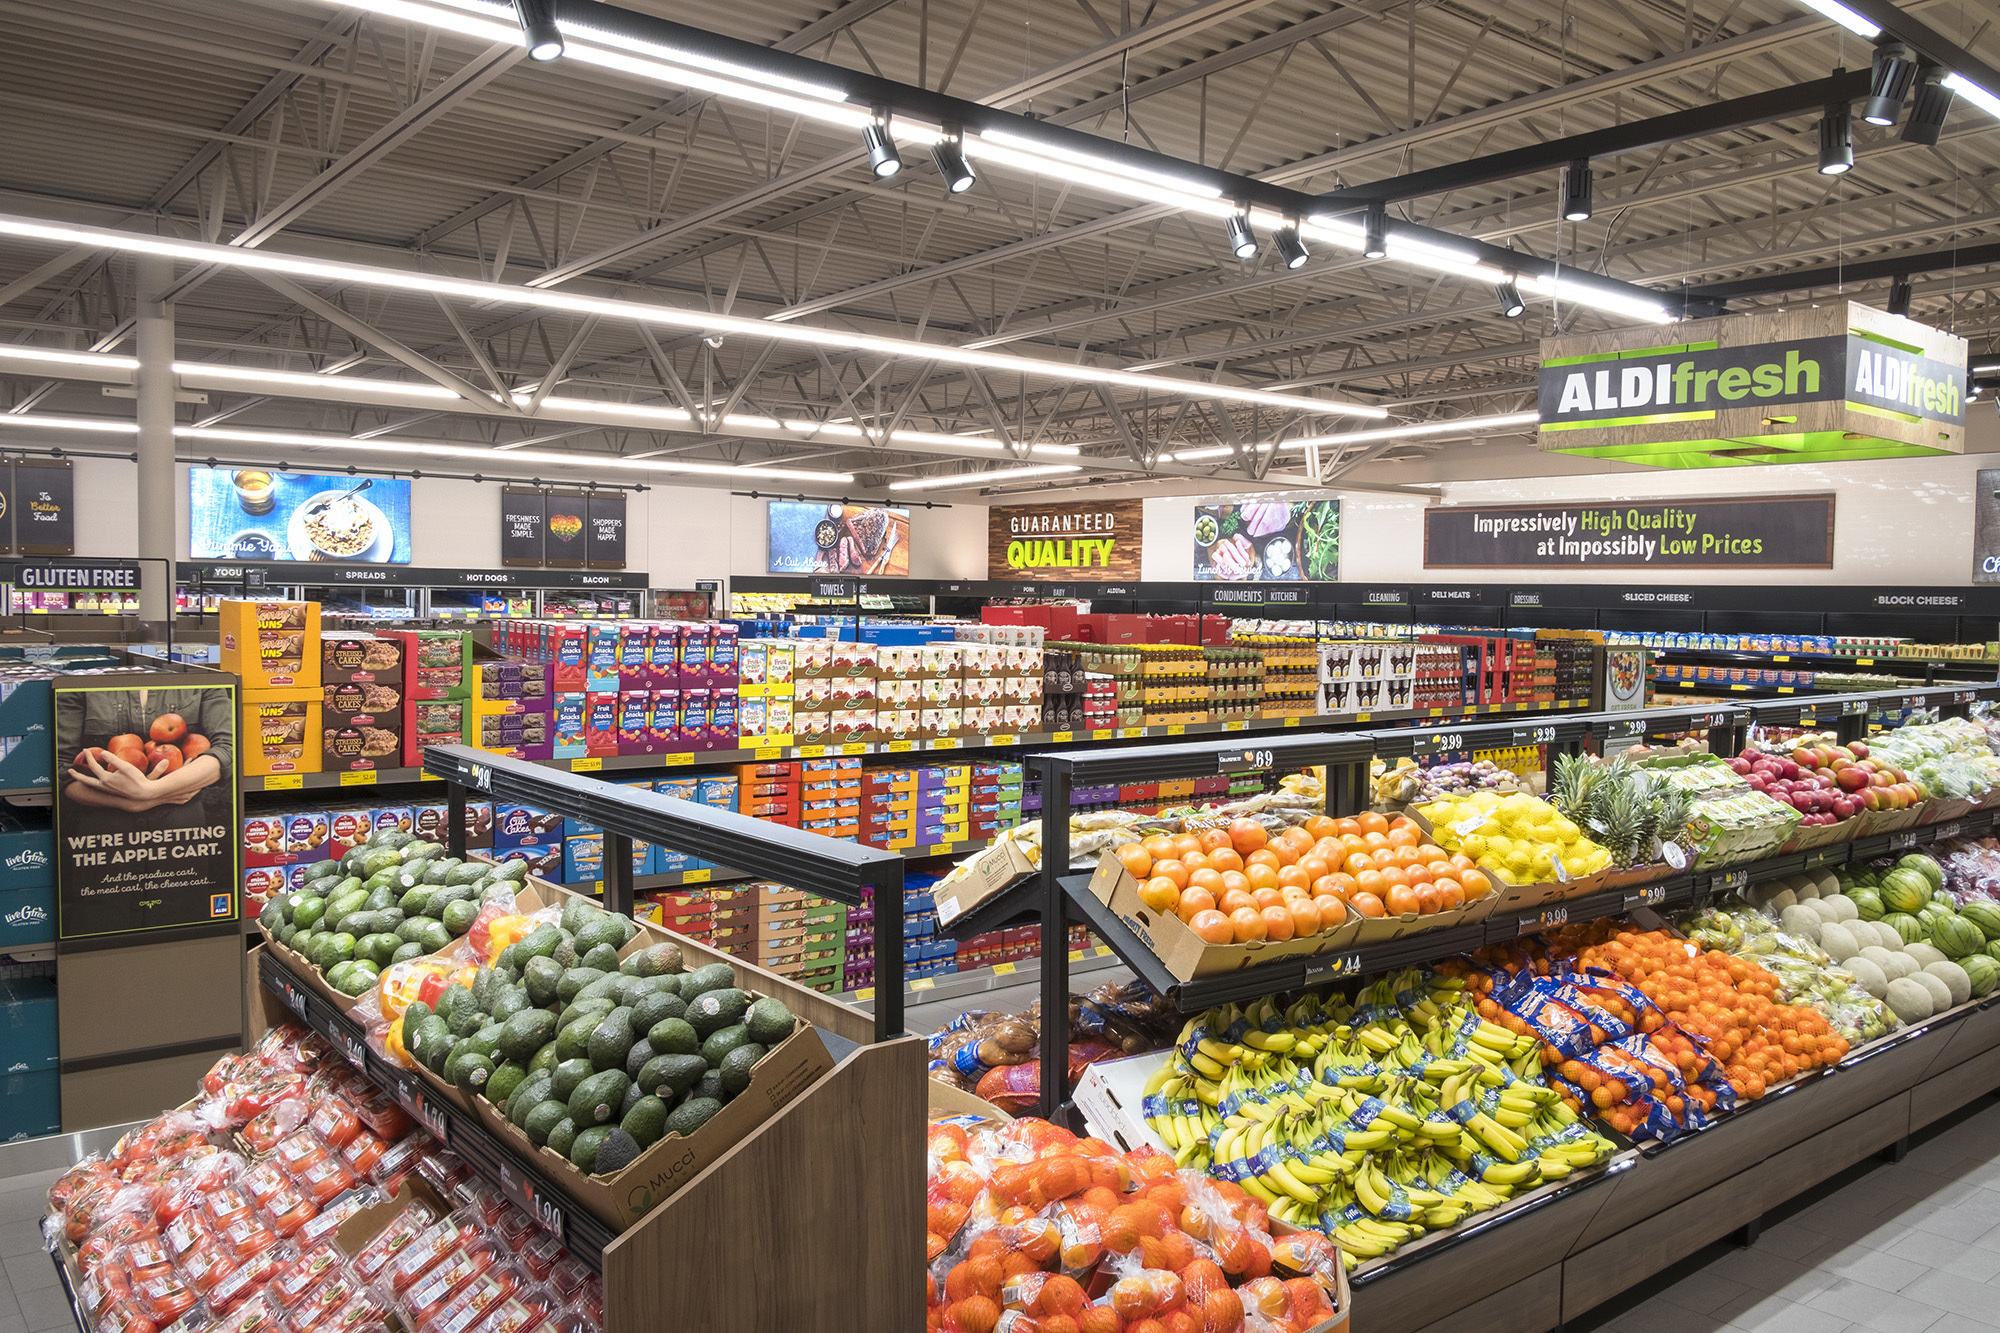 ALDI said it is increasing its fresh food selection by 40 percent with more organic, convenient and easy-to-prepare options.